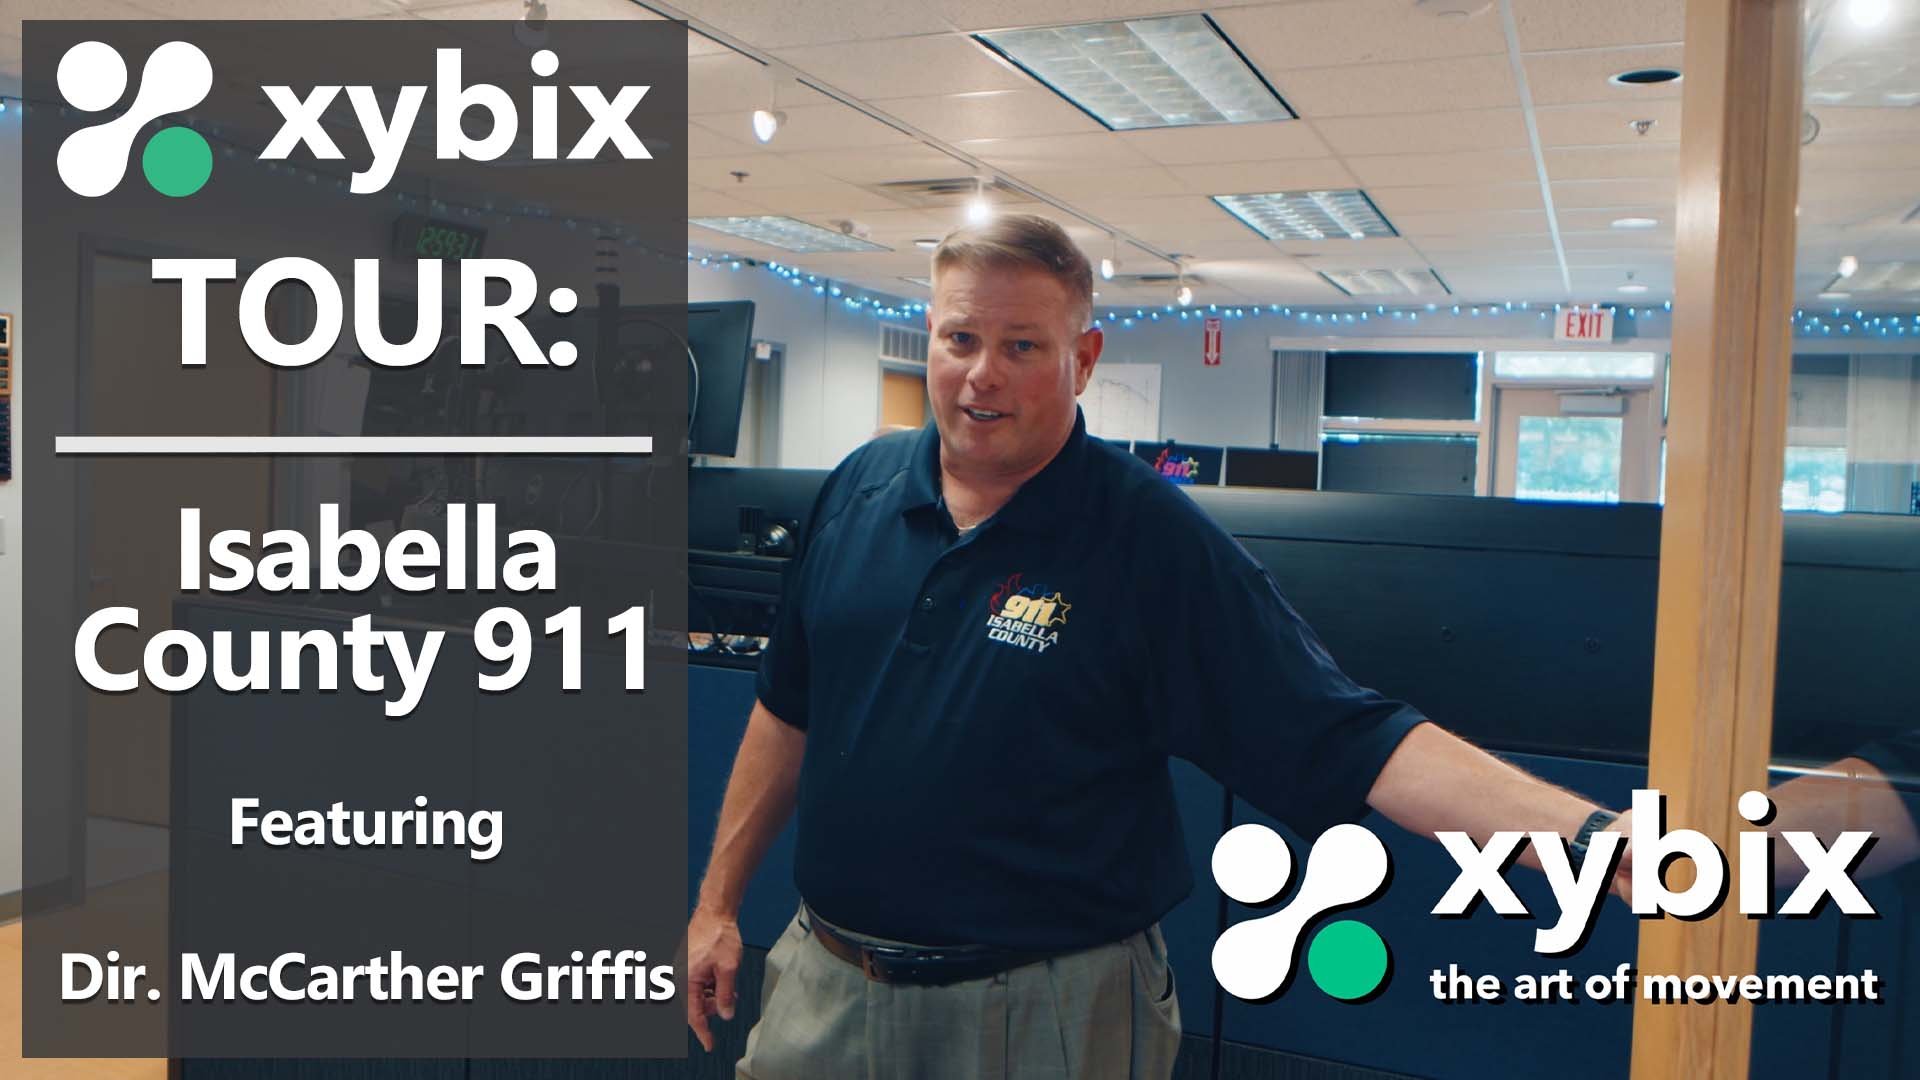 Xybix Tour of the Isabella County 911 Center (MI) featuring Dir. McCarther Griffis